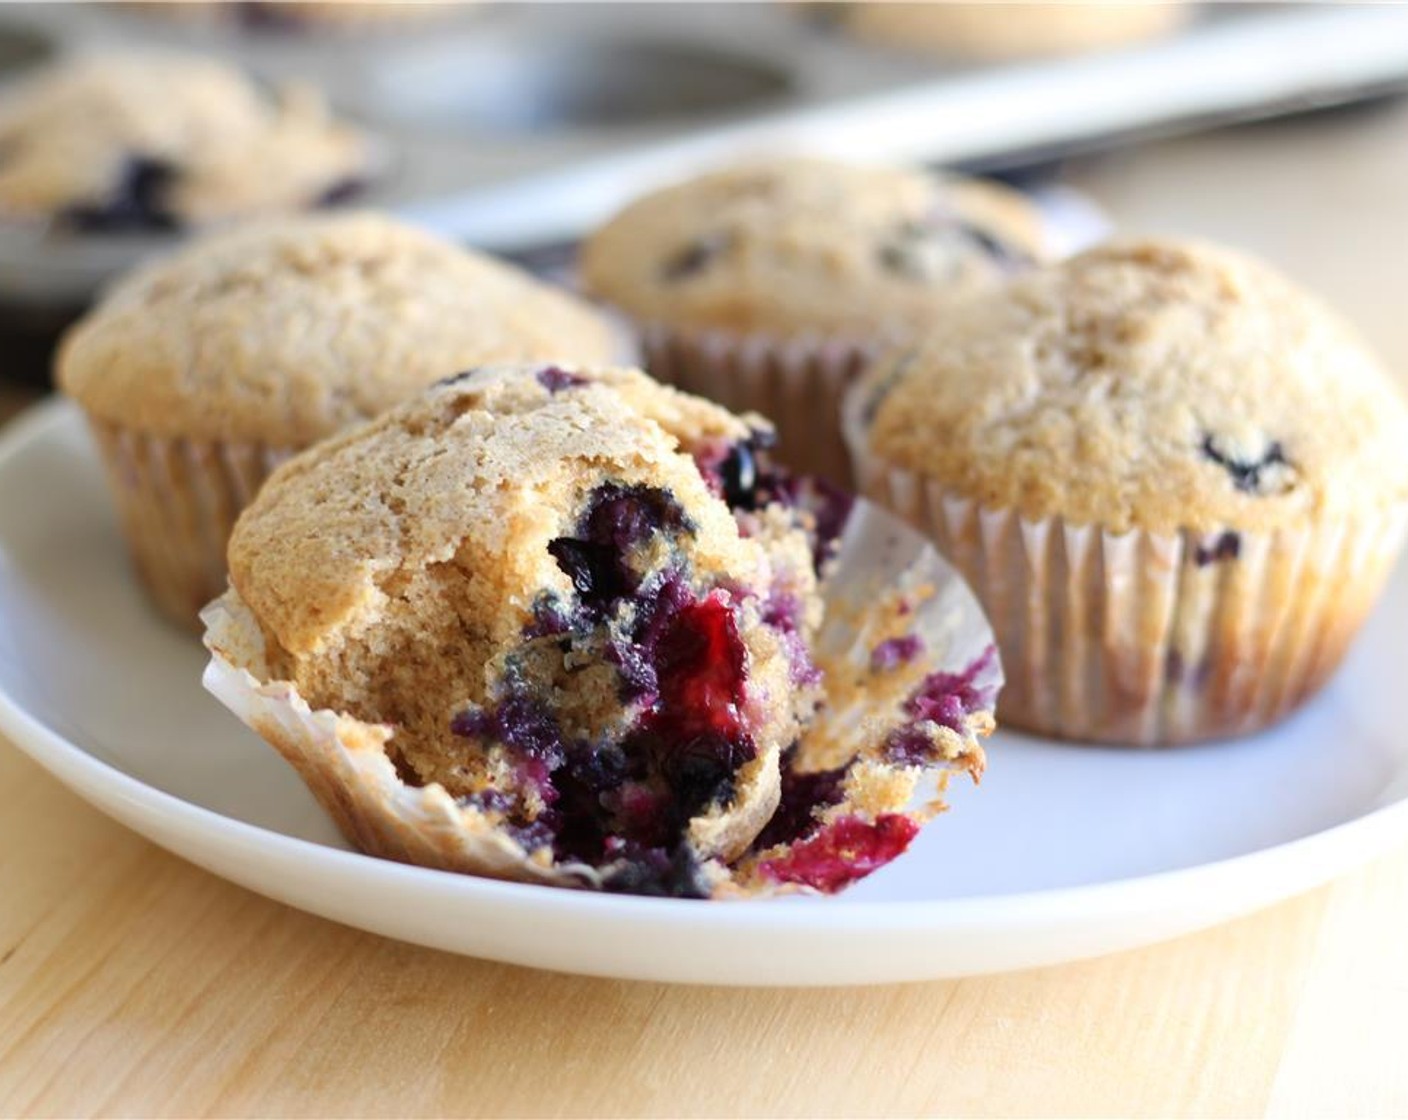 step 13 Serve warm from the oven, or allow to cool and store in an airtight container at room temperature for up to three days. Alternatively, you can wrap each muffin in plastic wrap and place in a ziploc bag to store in the freezer.